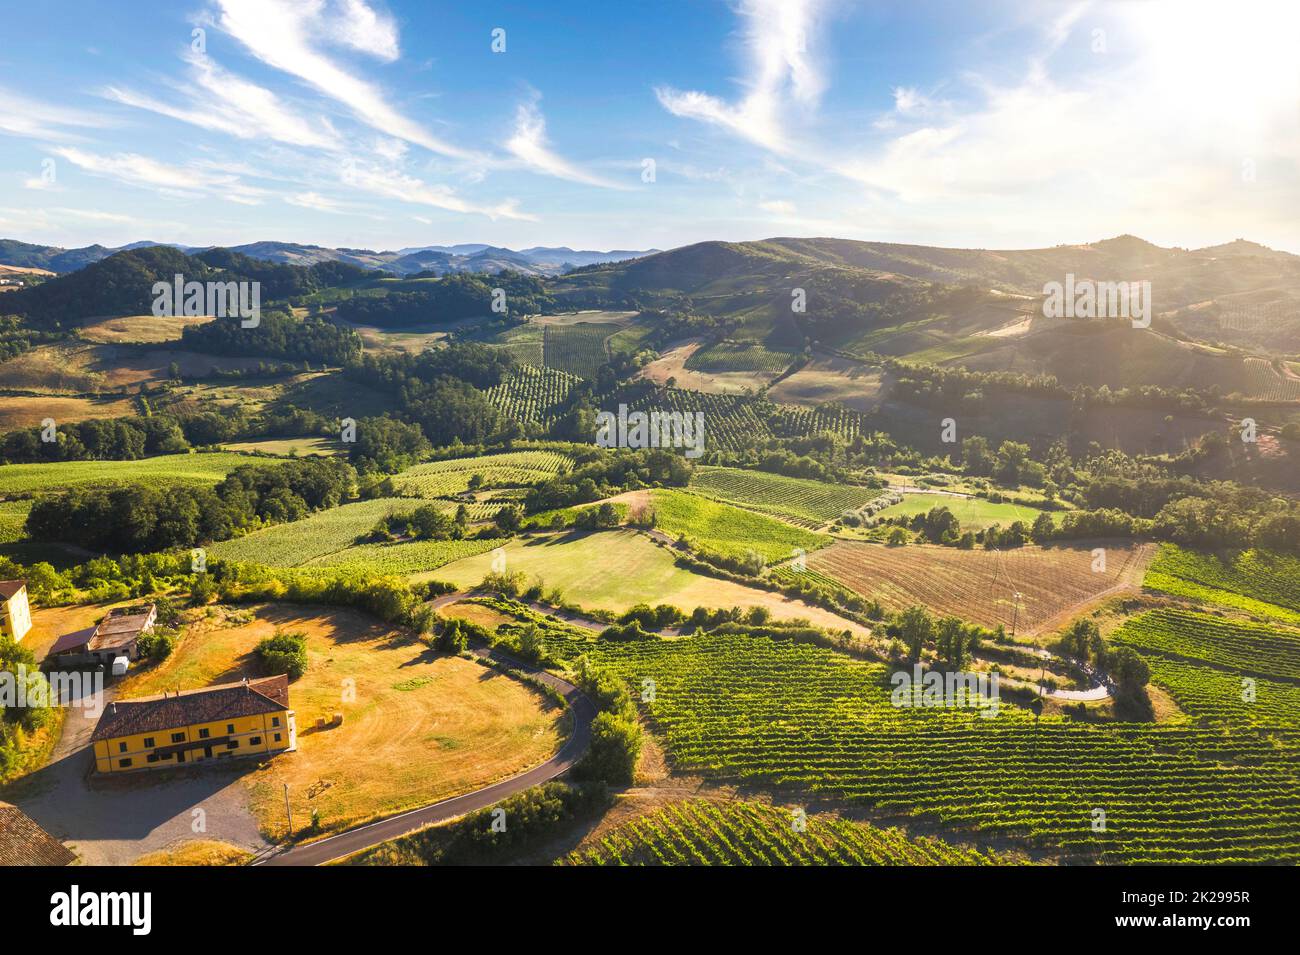 Aerial view of hills in Oltrepo' Pavese covered in vineyards and fields at sunset, Lombardy, Italy Stock Photo